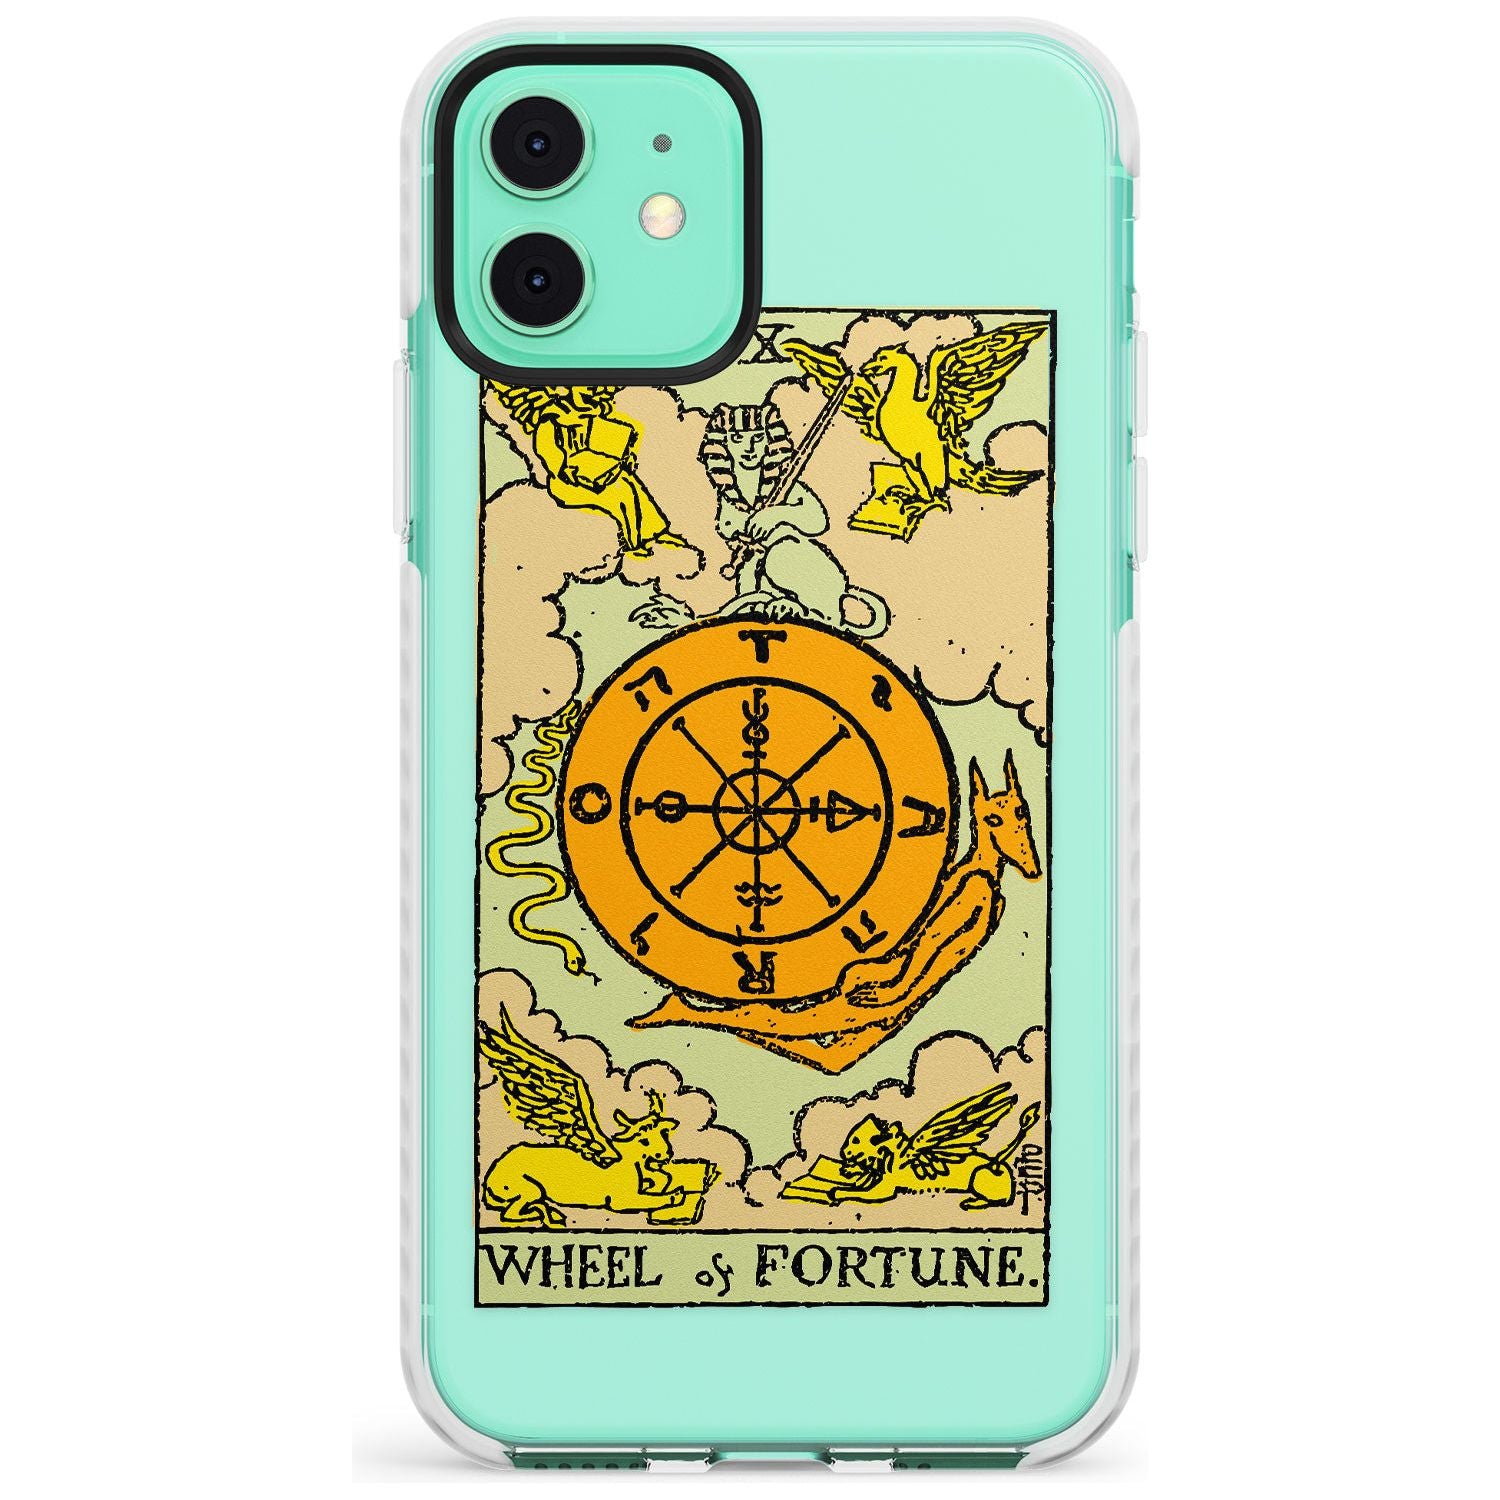 Wheel of Fortune Tarot Card - Colour Slim TPU Phone Case for iPhone 11